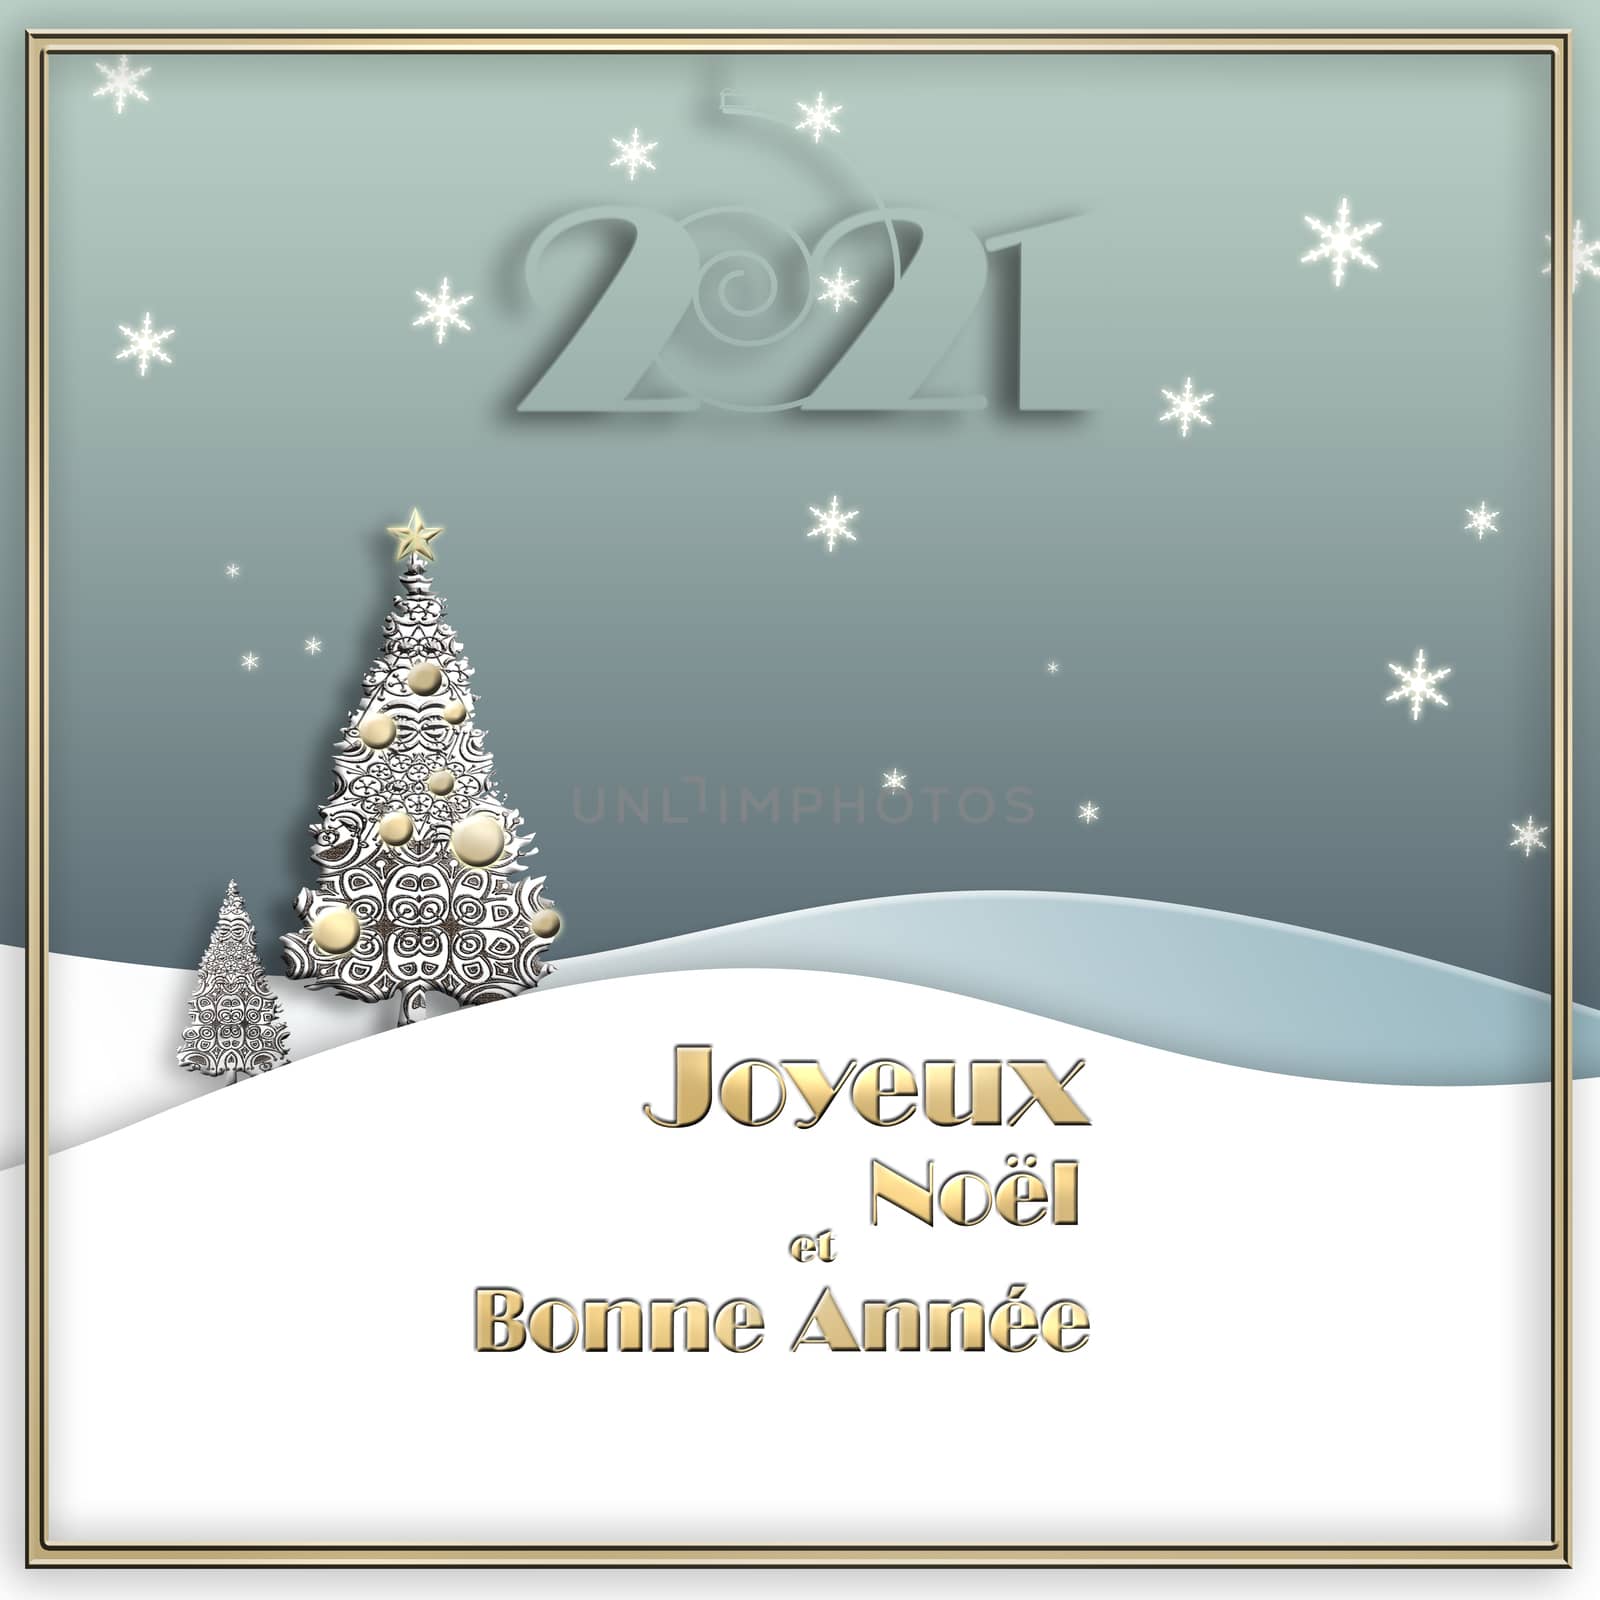 2021 greeting card on pastel winter landscape, gold Christmas trees, hanging digit 2021 with Text Merry Christmas and Happy New Year in french language Joyeux Noel et Bonne Annee. 3D illustration